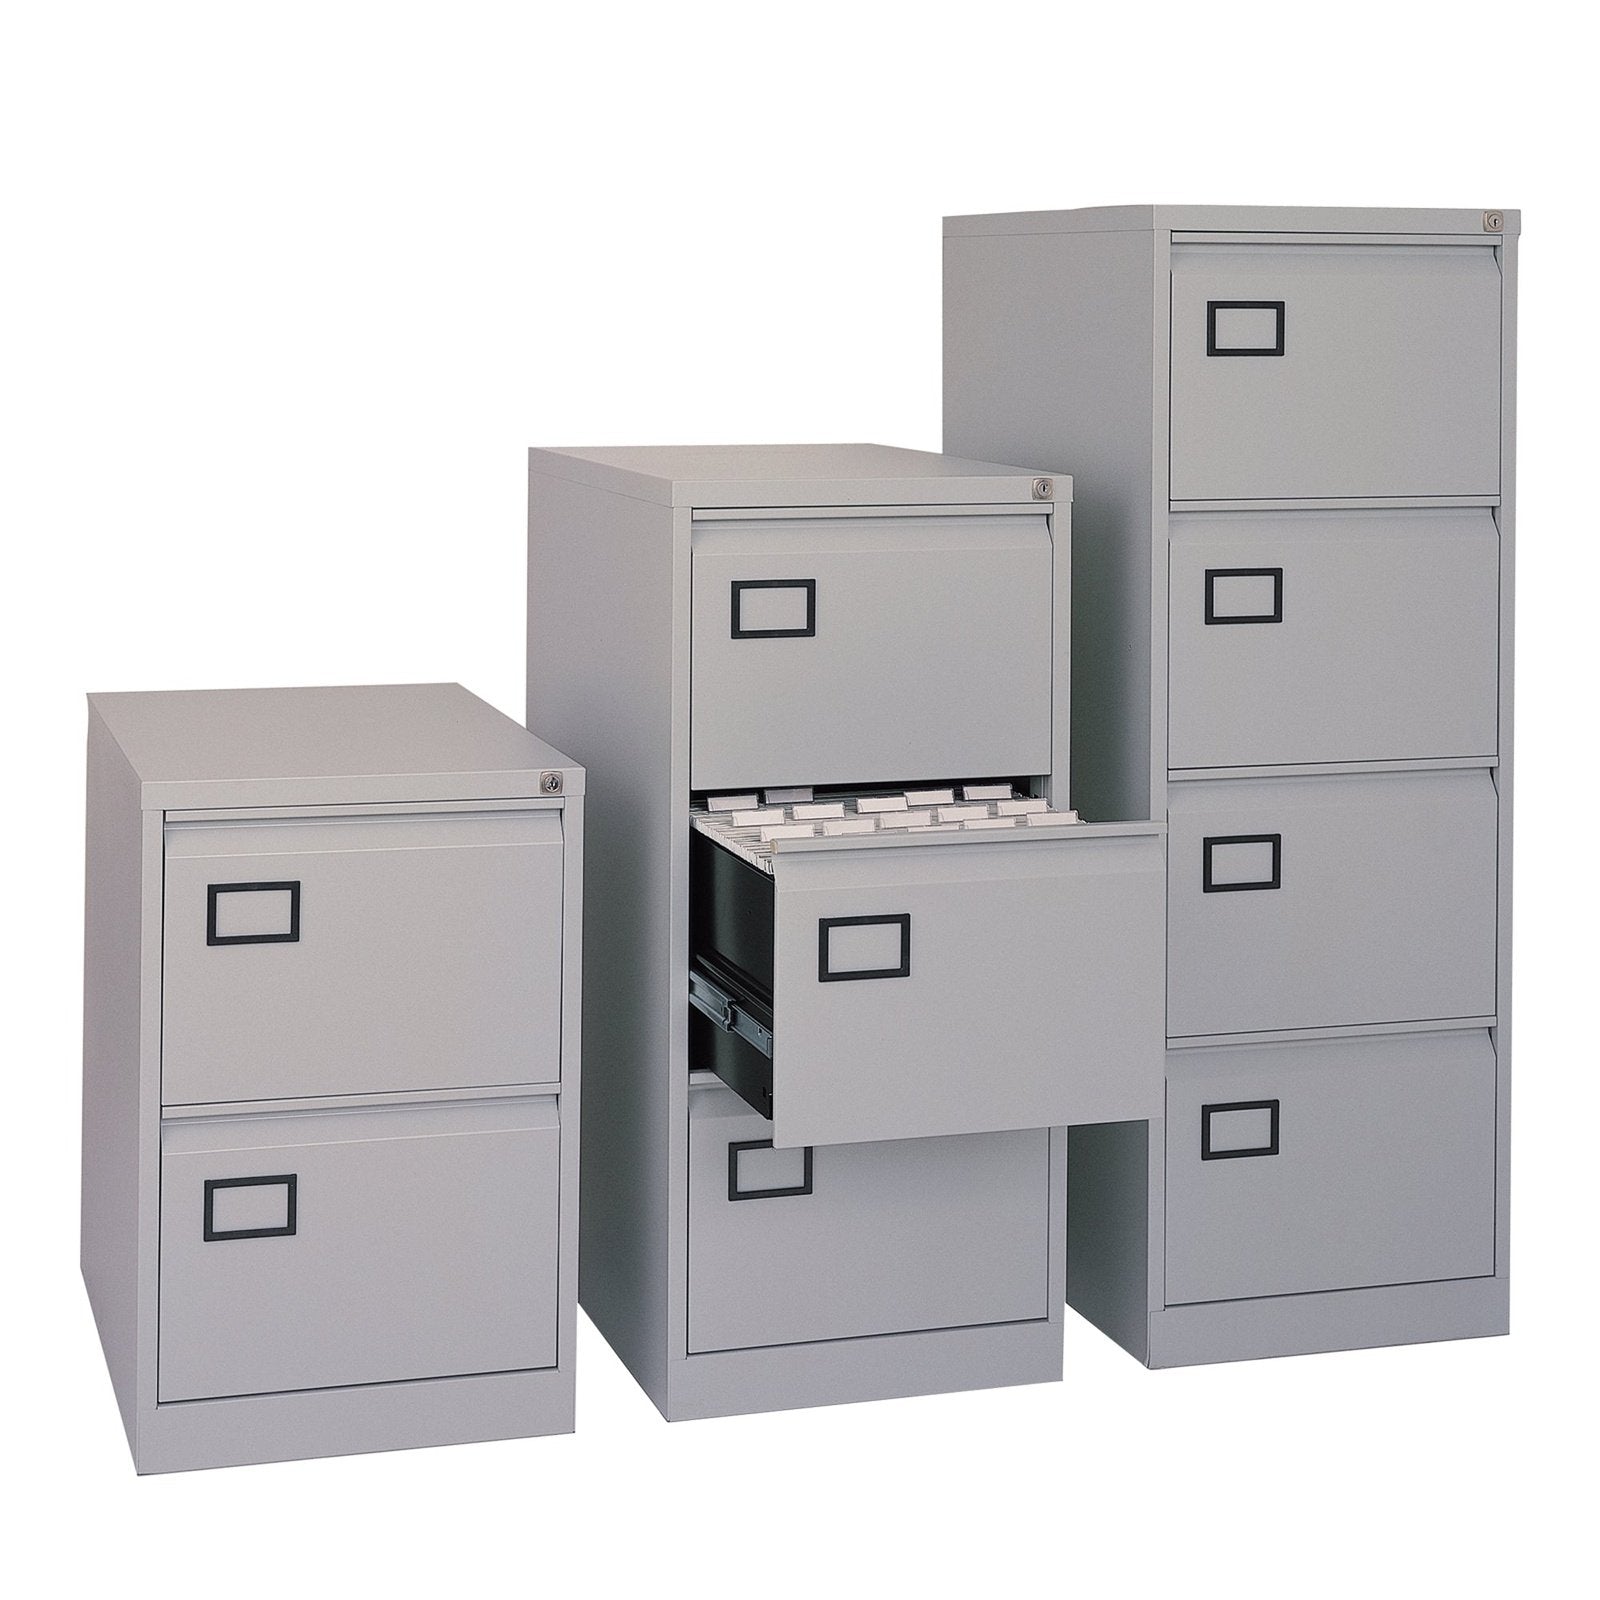 Steel executive filing cabinet - Office Products Online